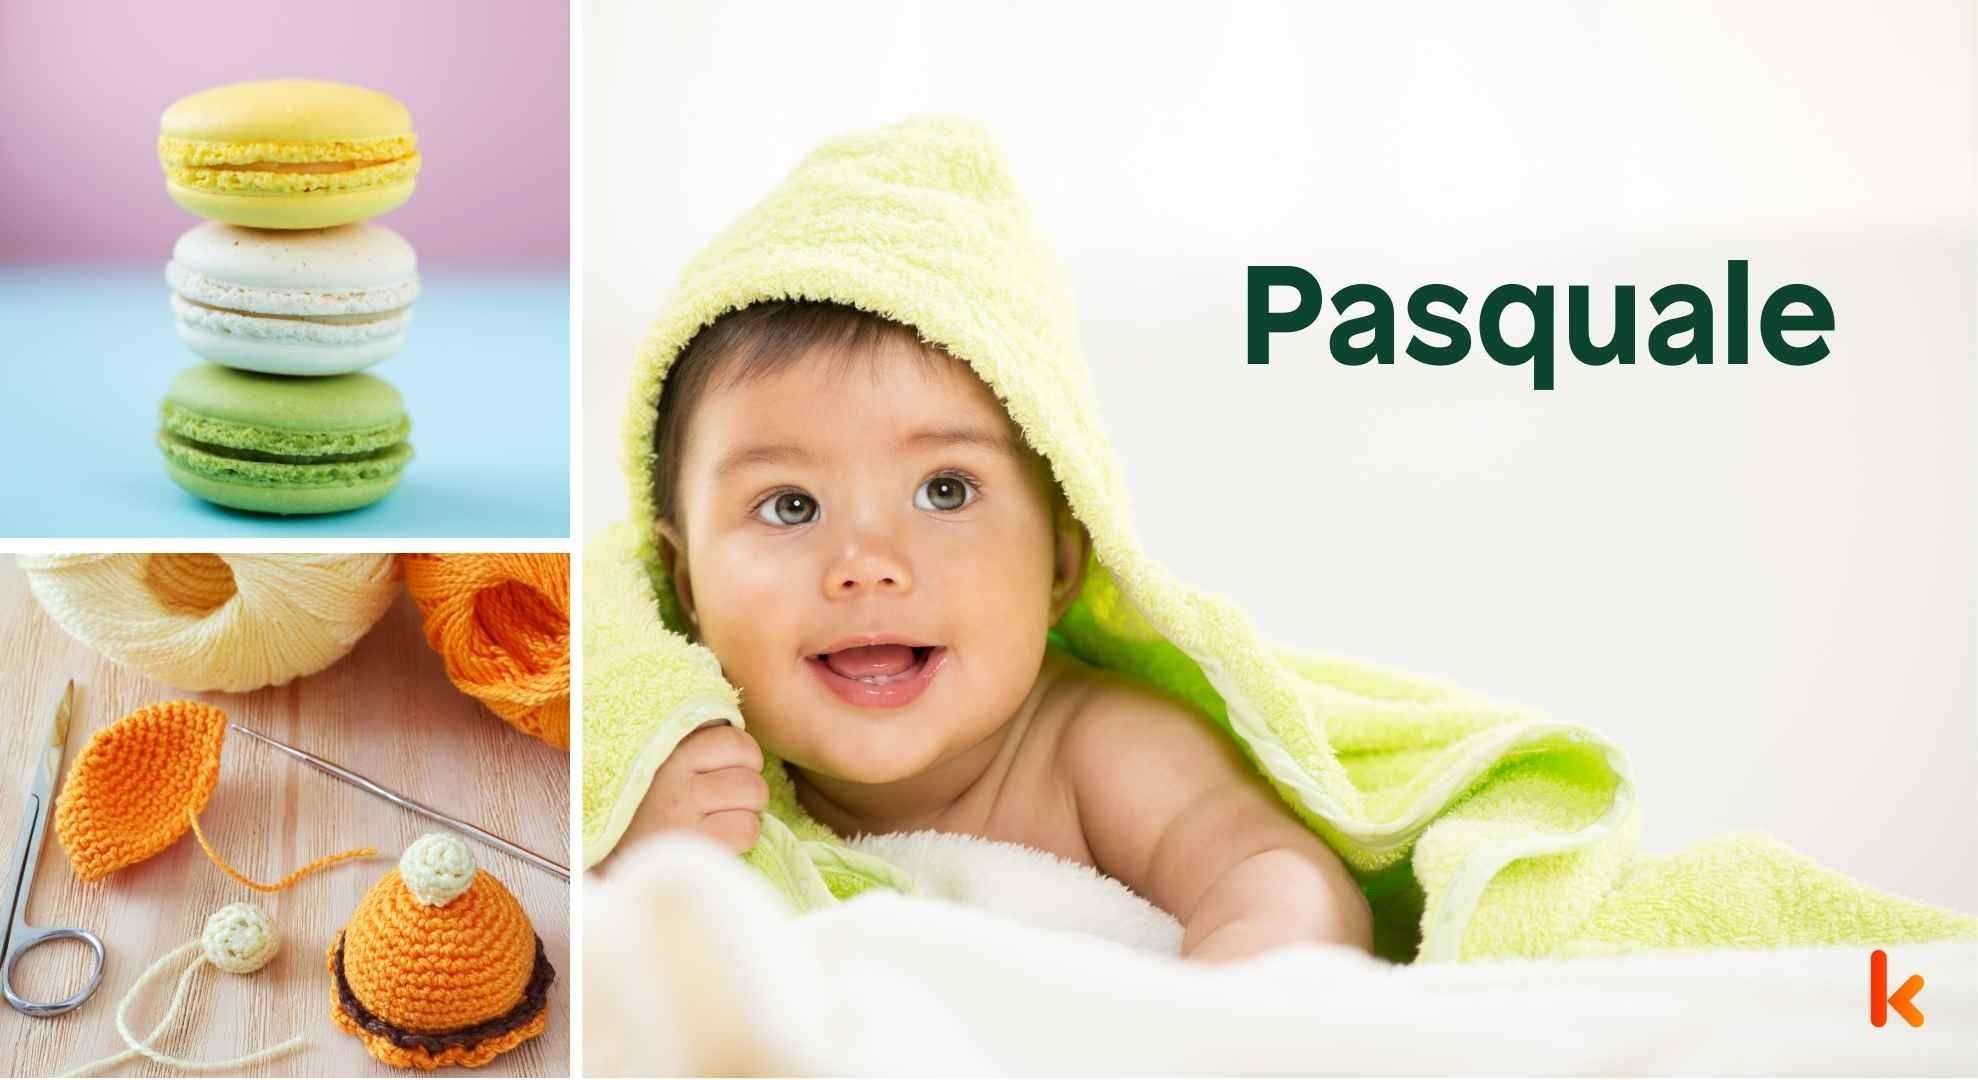 Meaning of the name Pasquale